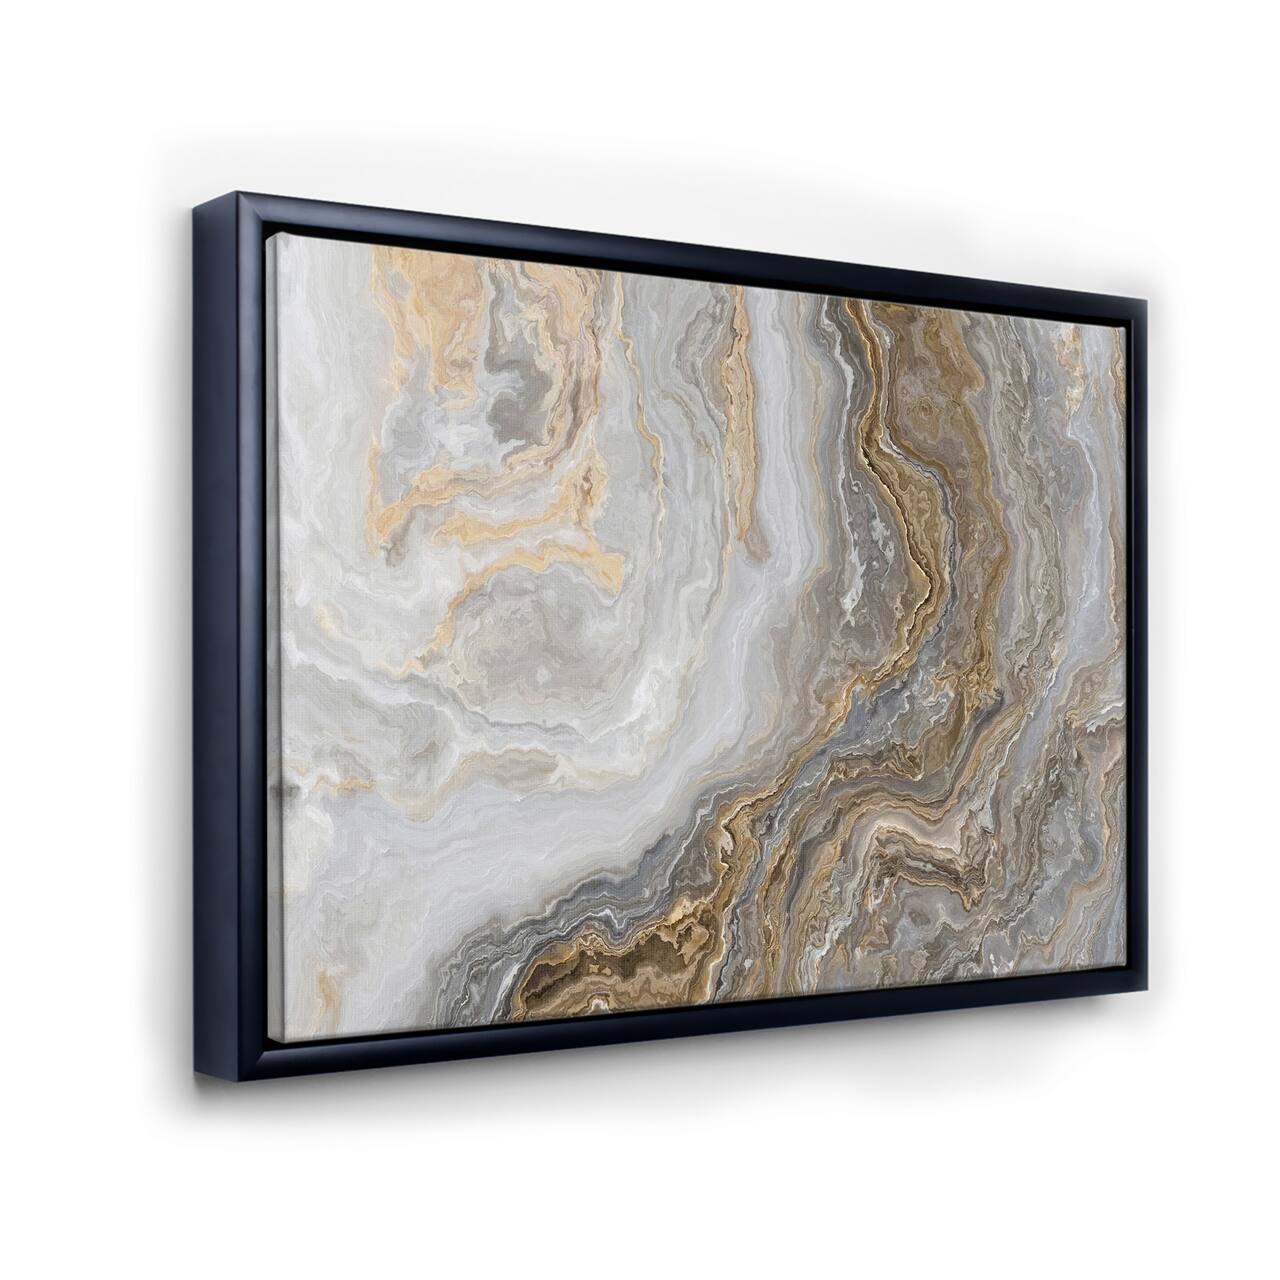 Designart - White Marble with Curley Grey and Gold Veins - Glam Framed Canvas Wall Art Print